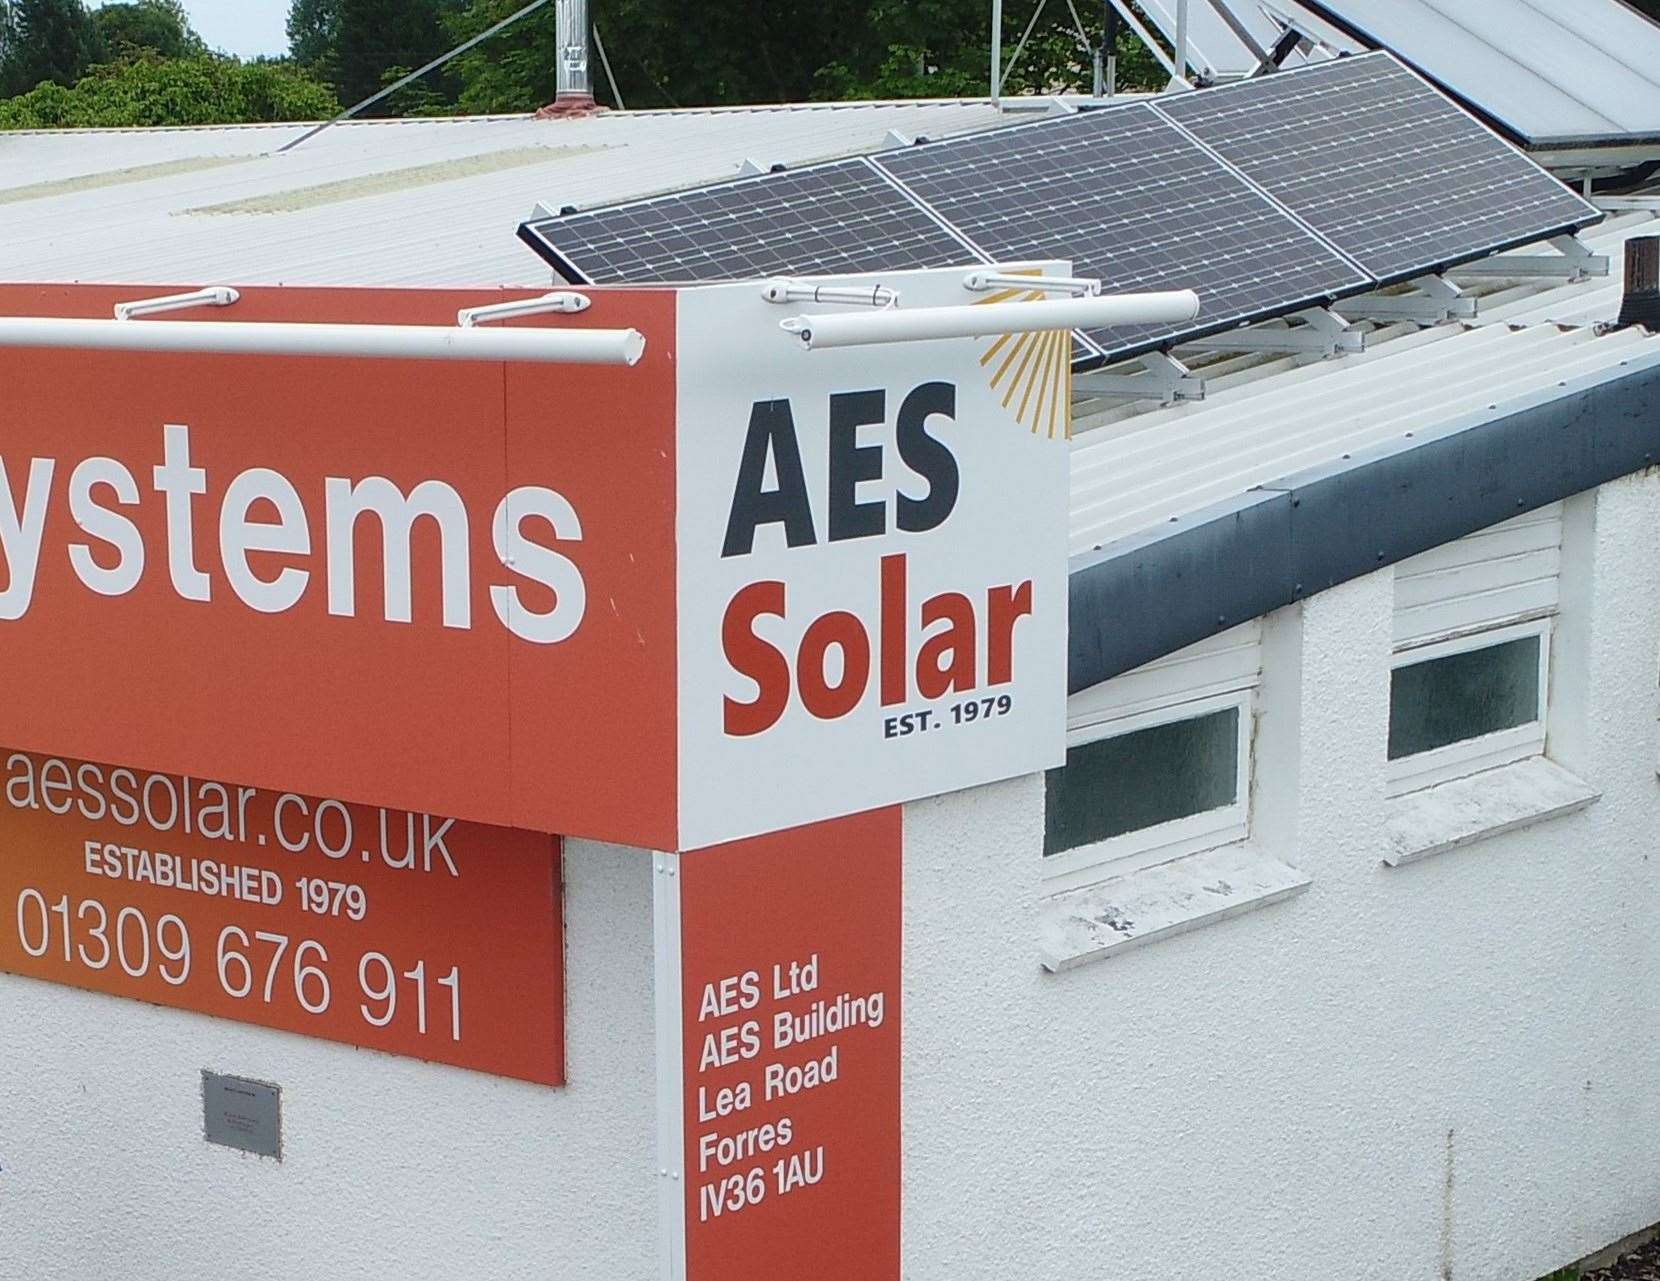 Forres-based AES Solar has secured £50,000 of HIE investment to aid expansion plans and move towards employee ownership.